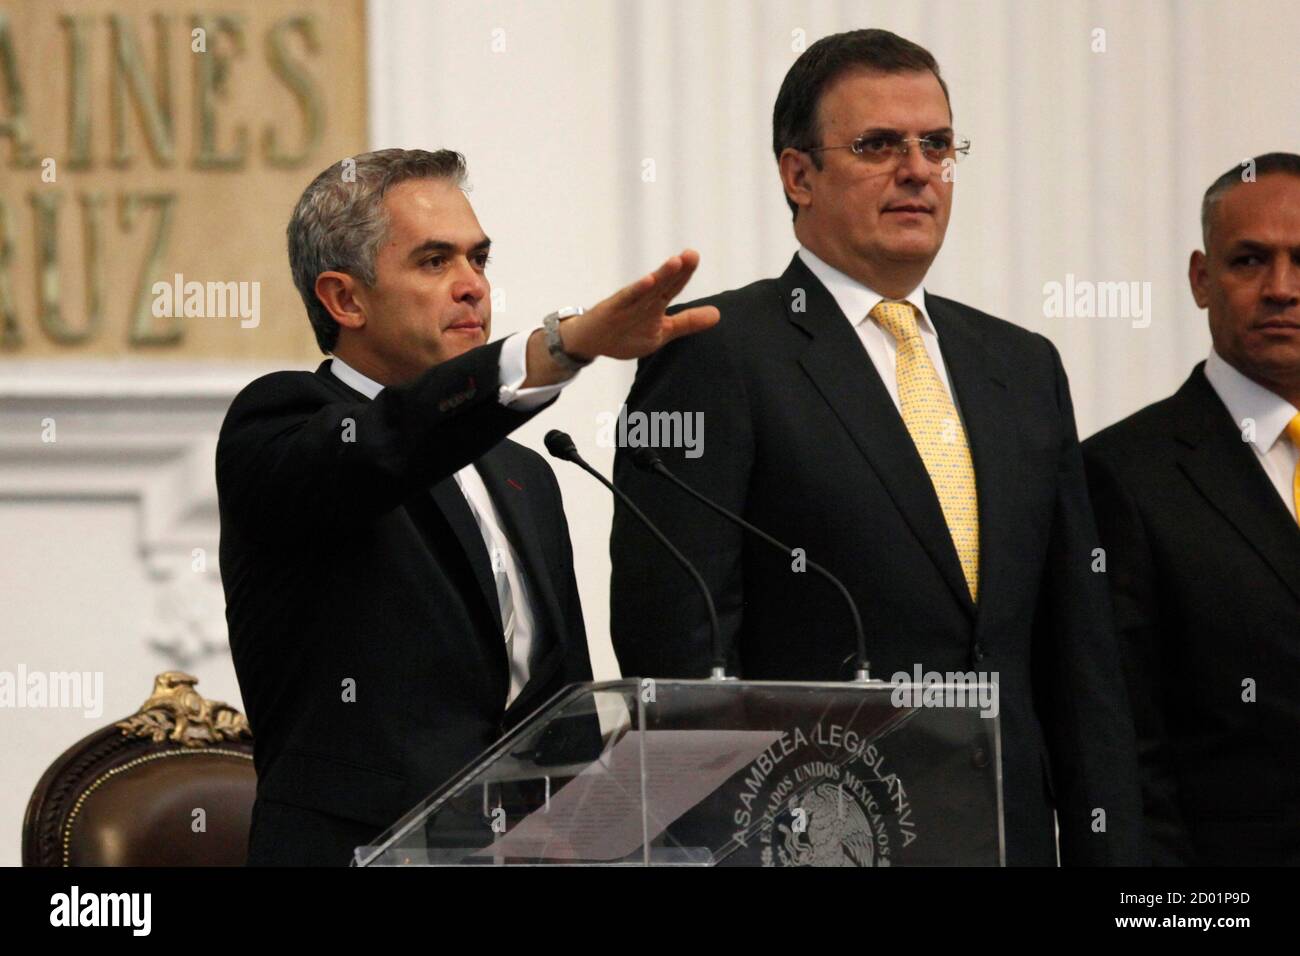 Mexico's new head of the Federal District Miguel Mancera (L) takes an oath as his outgoing counterpart Marcelo Ebrad looks on, during a ceremony inside the Legislative Assembly of the Federal District building in Mexico City December 5, 2012. REUTERS/Edgard Garrido (MEXICO - Tags: POLITICS) Stock Photo